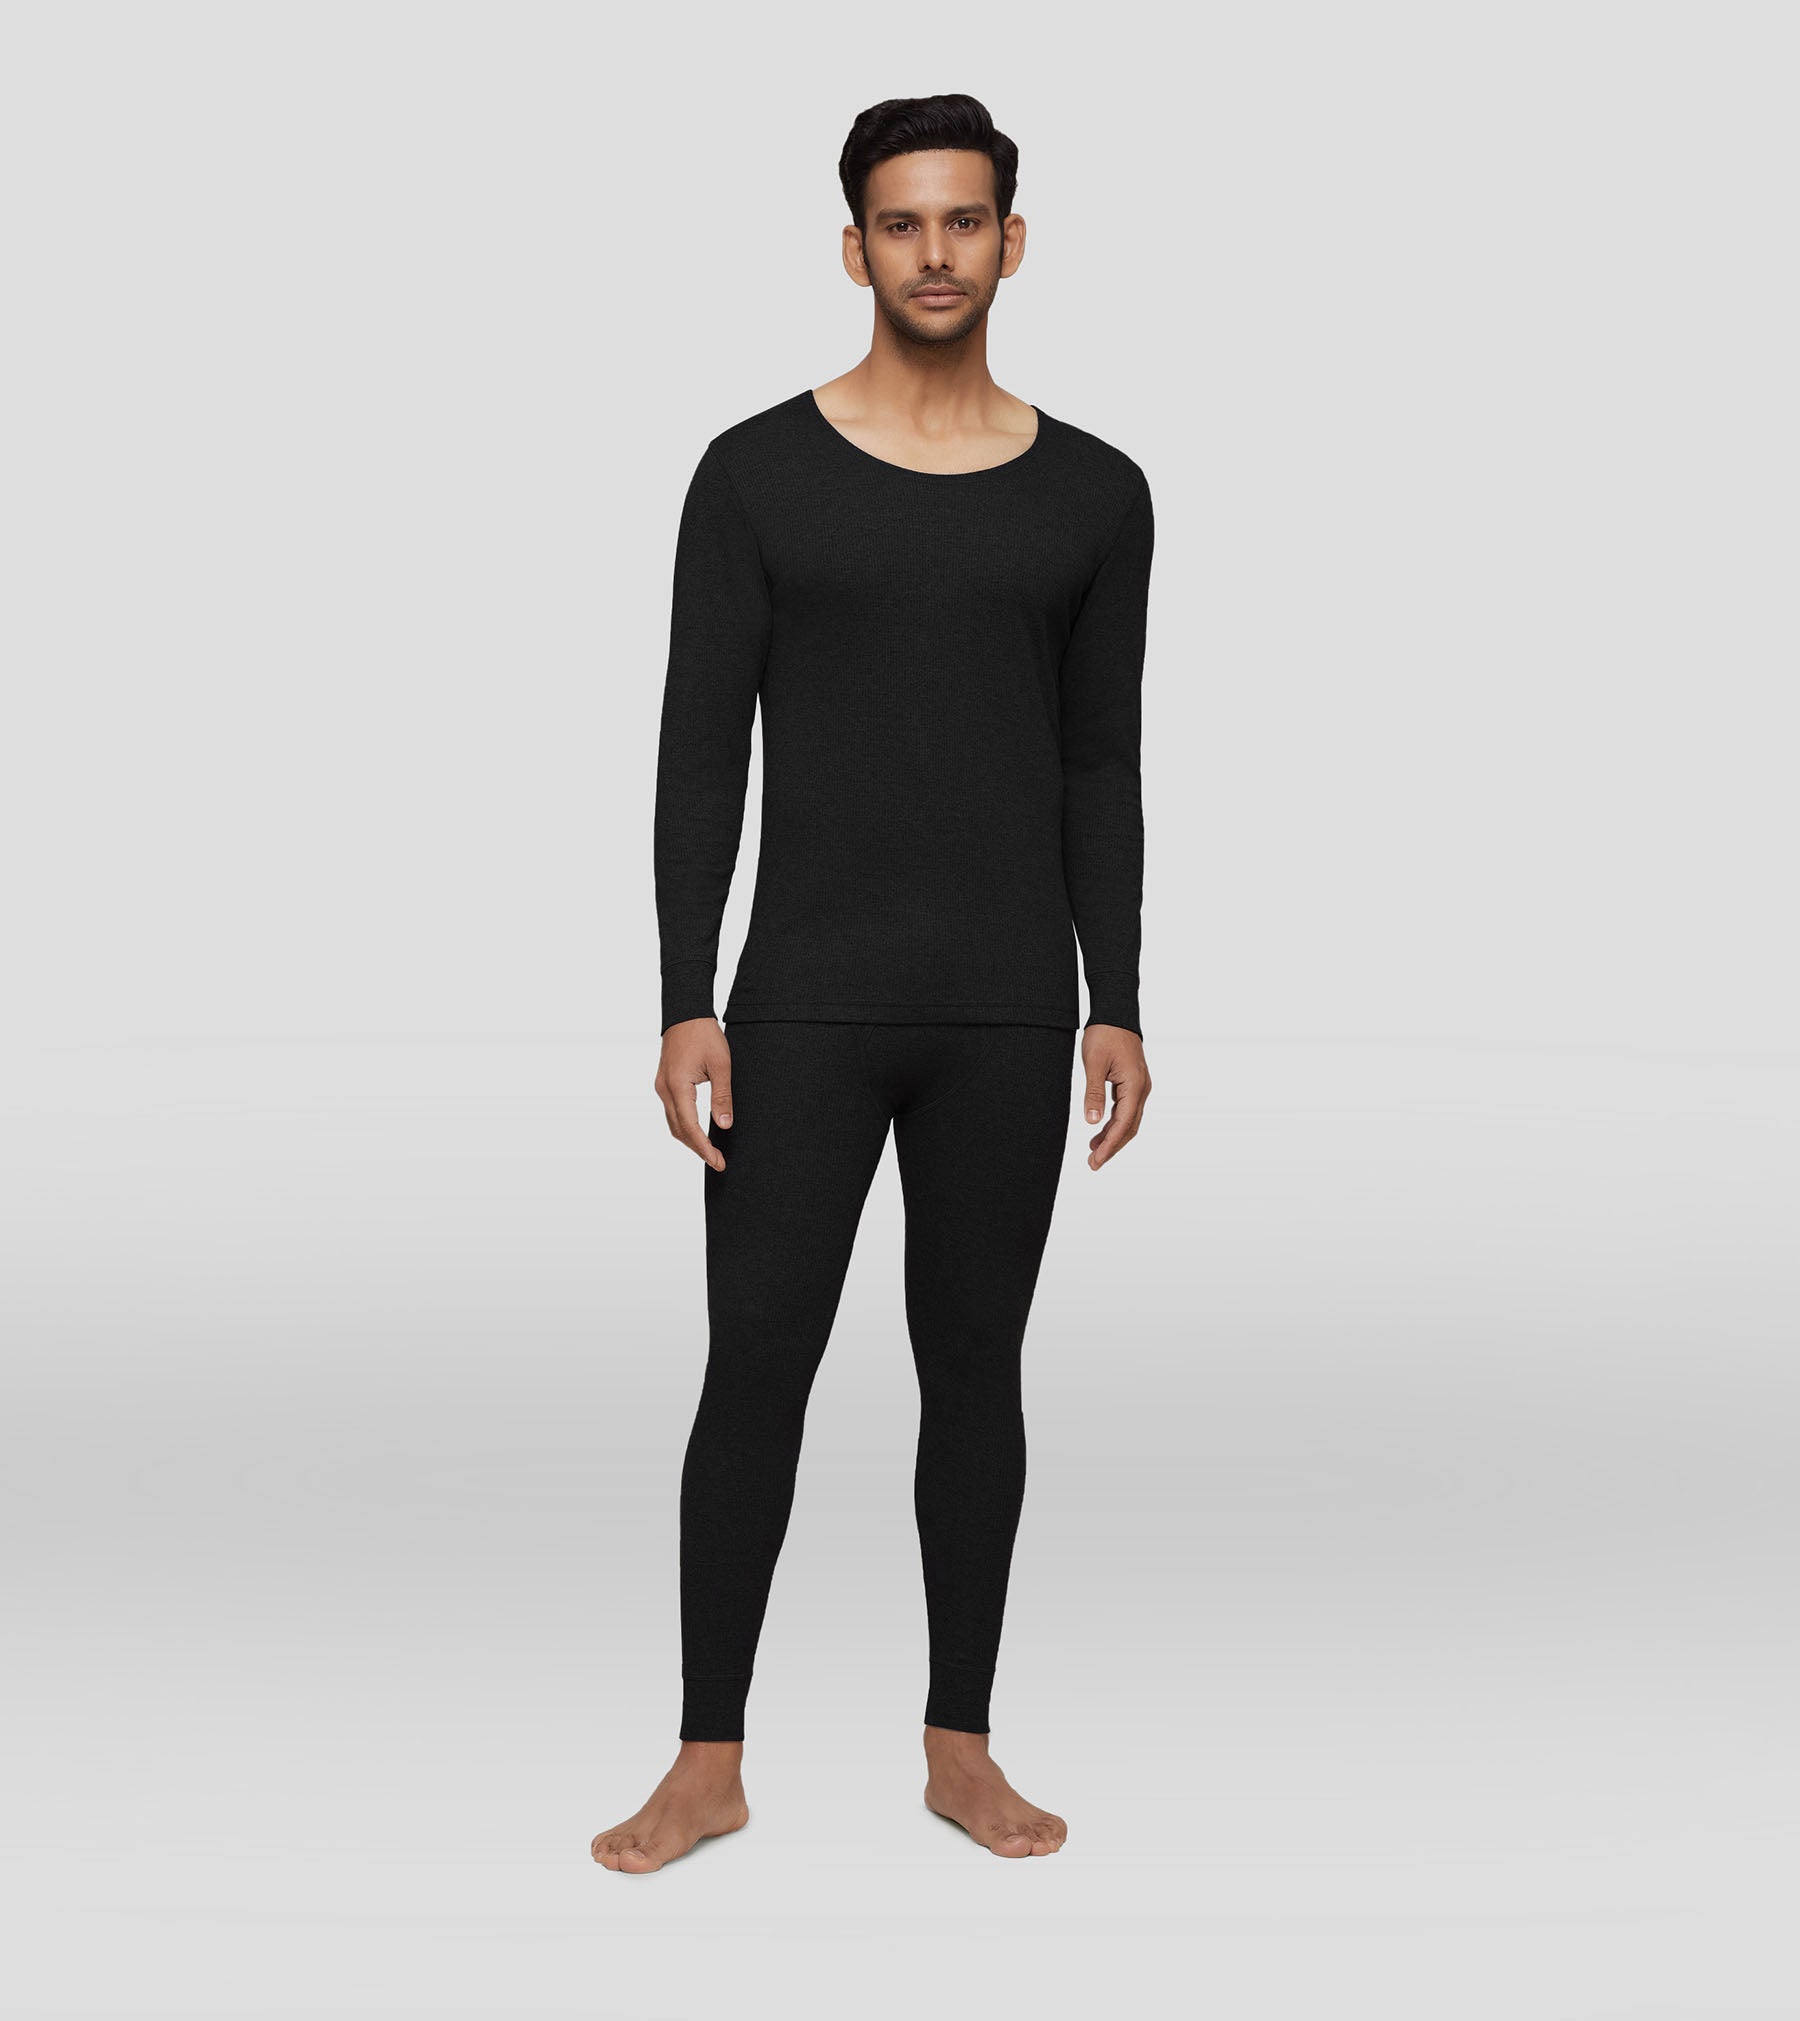 Dickies Mens Long Johns Thermal Underwear Set, 2 Piece Cold